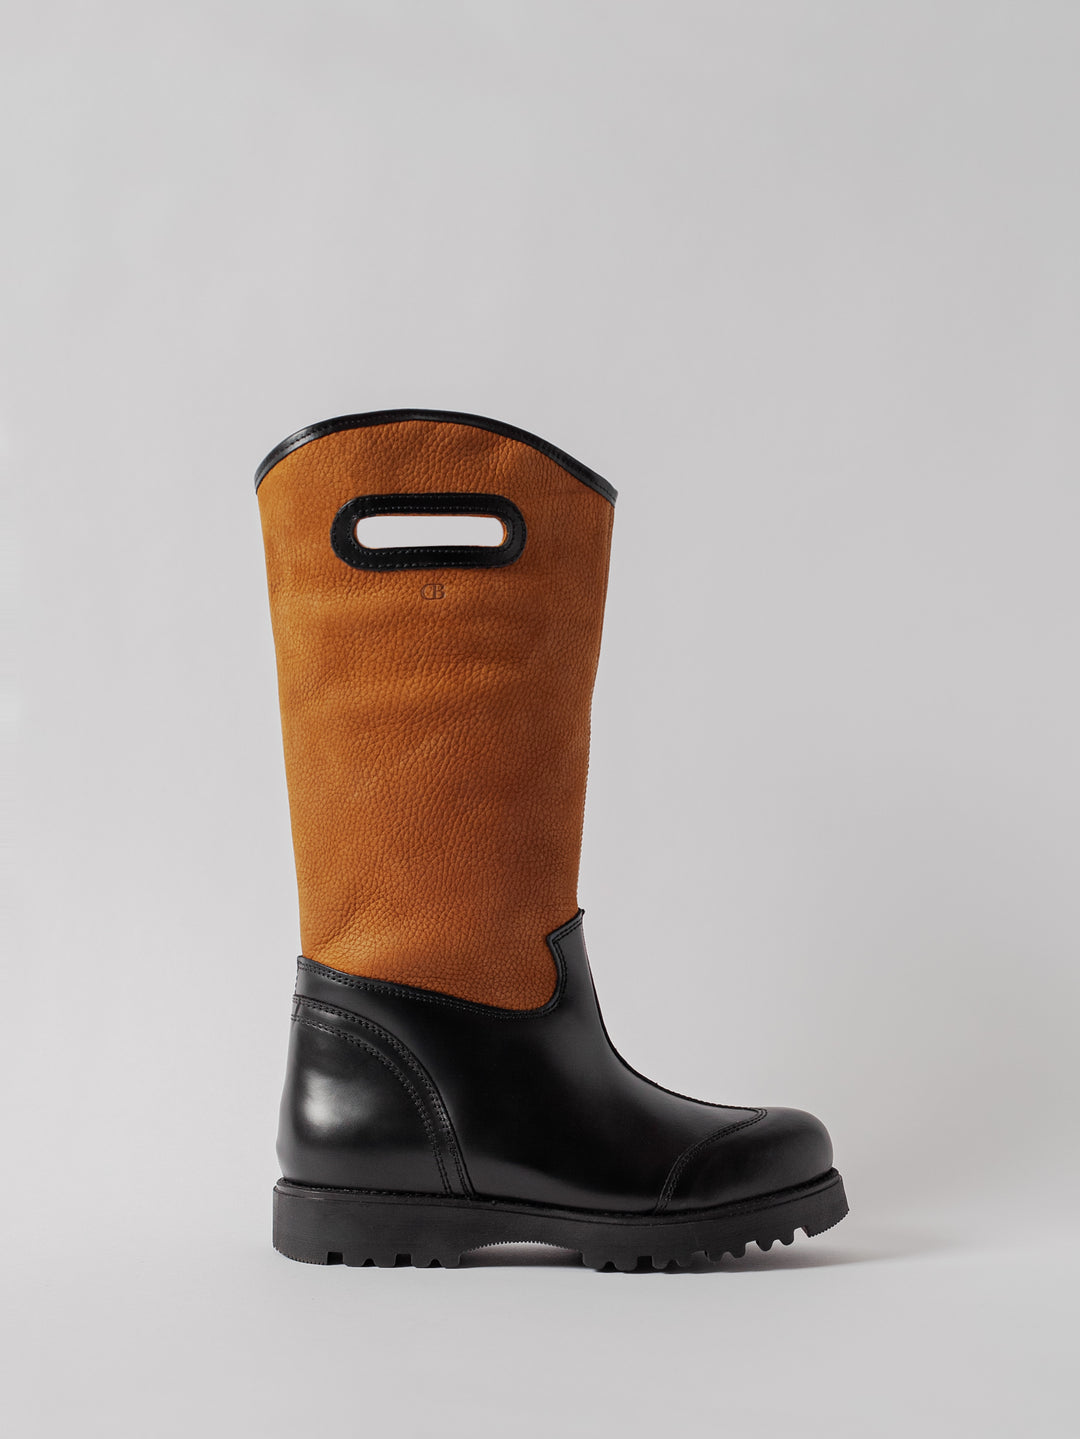 Blankens black and brown boot with handles The Alexia High Black Brown Eco